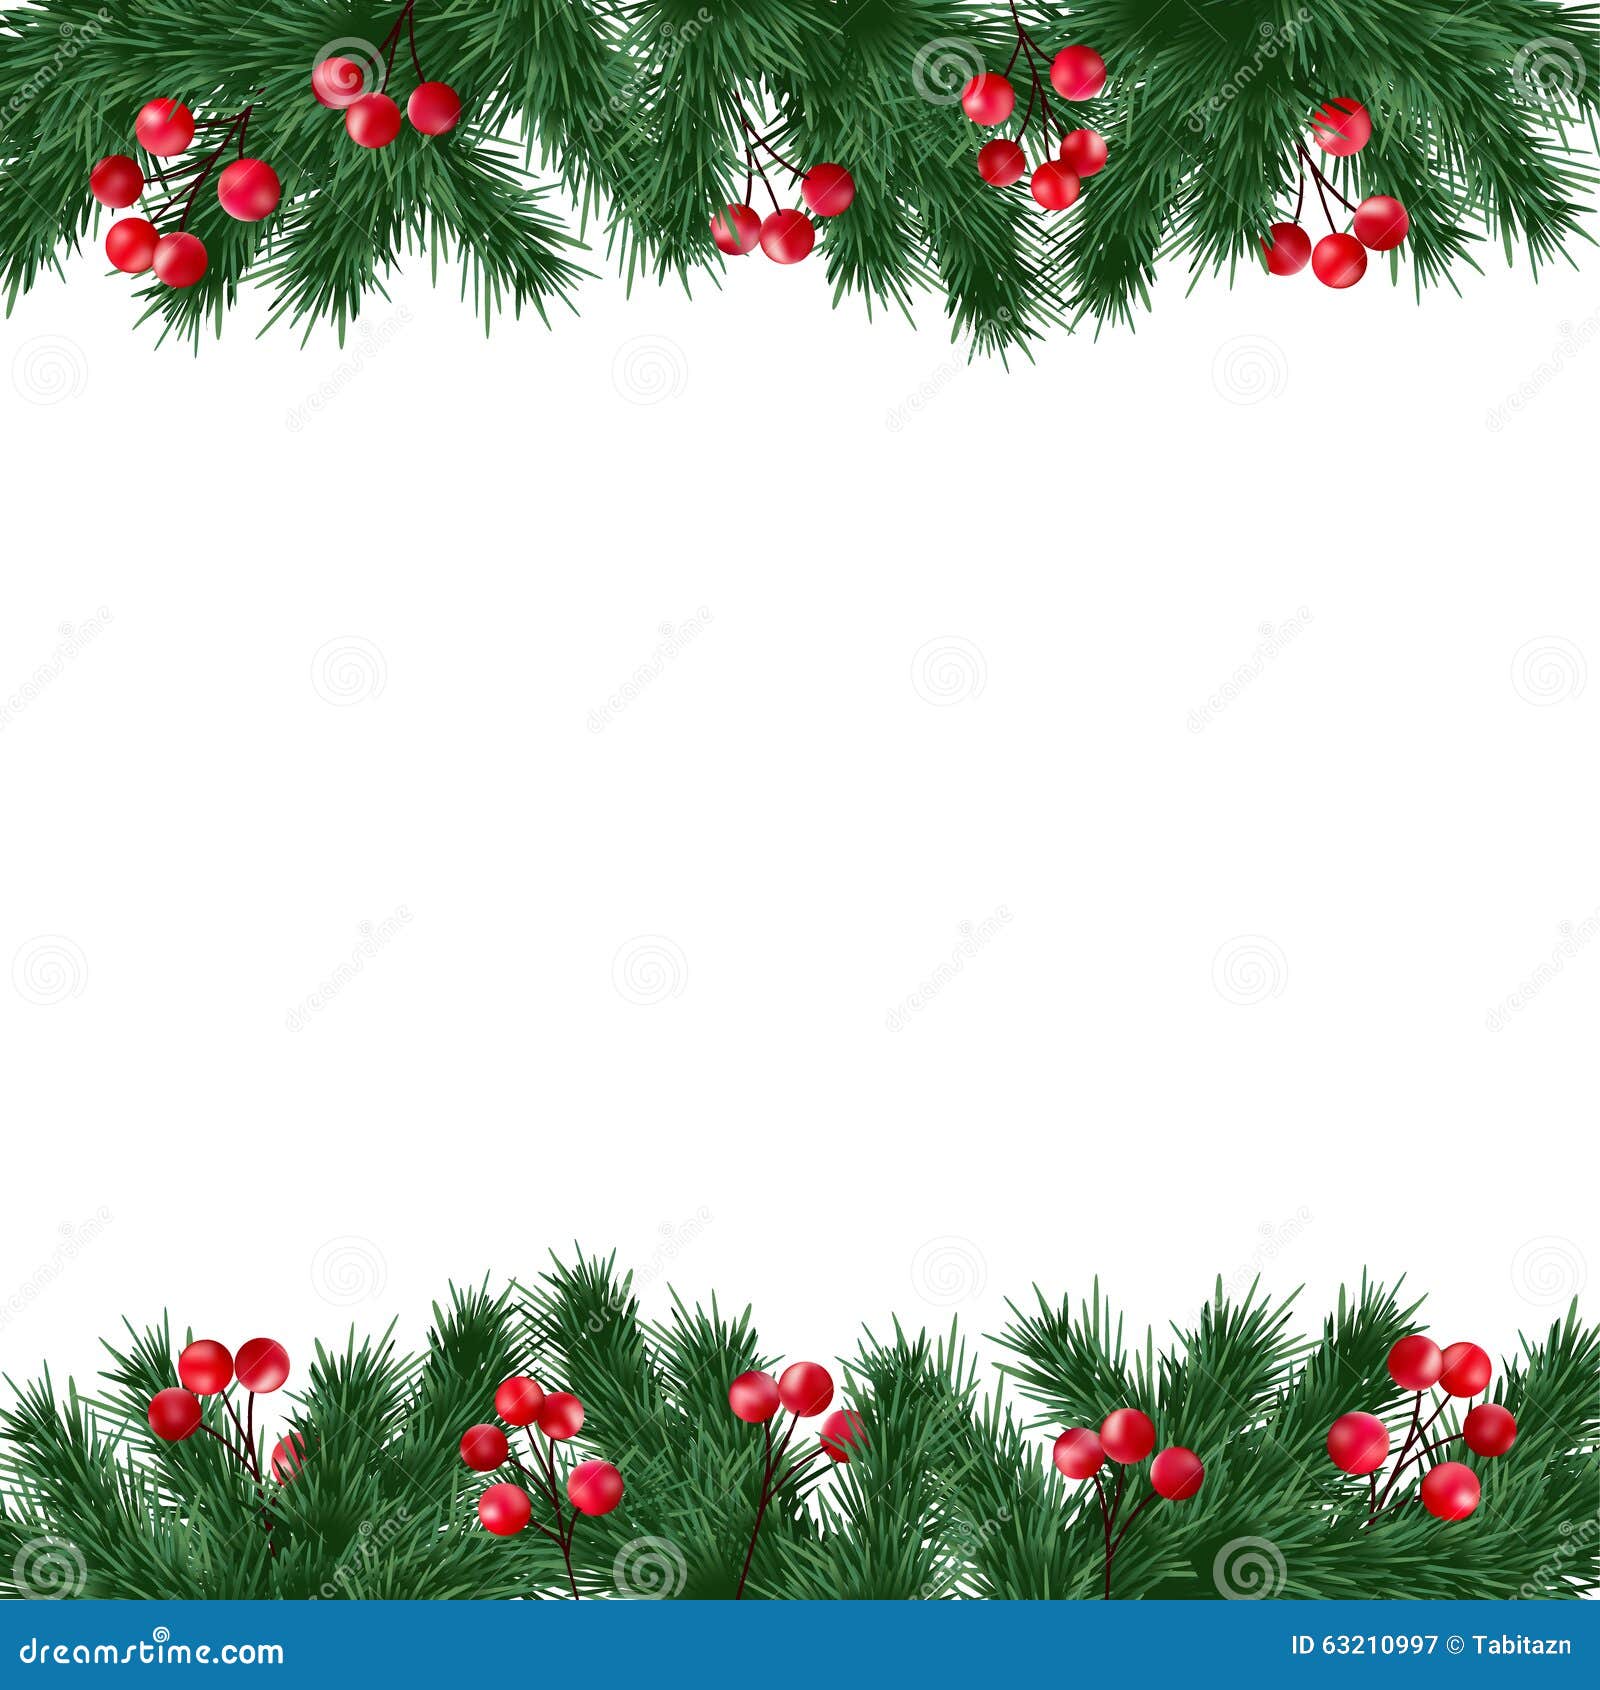 christmas greeting card, invitation with fir tree branches and holly berries border on white background